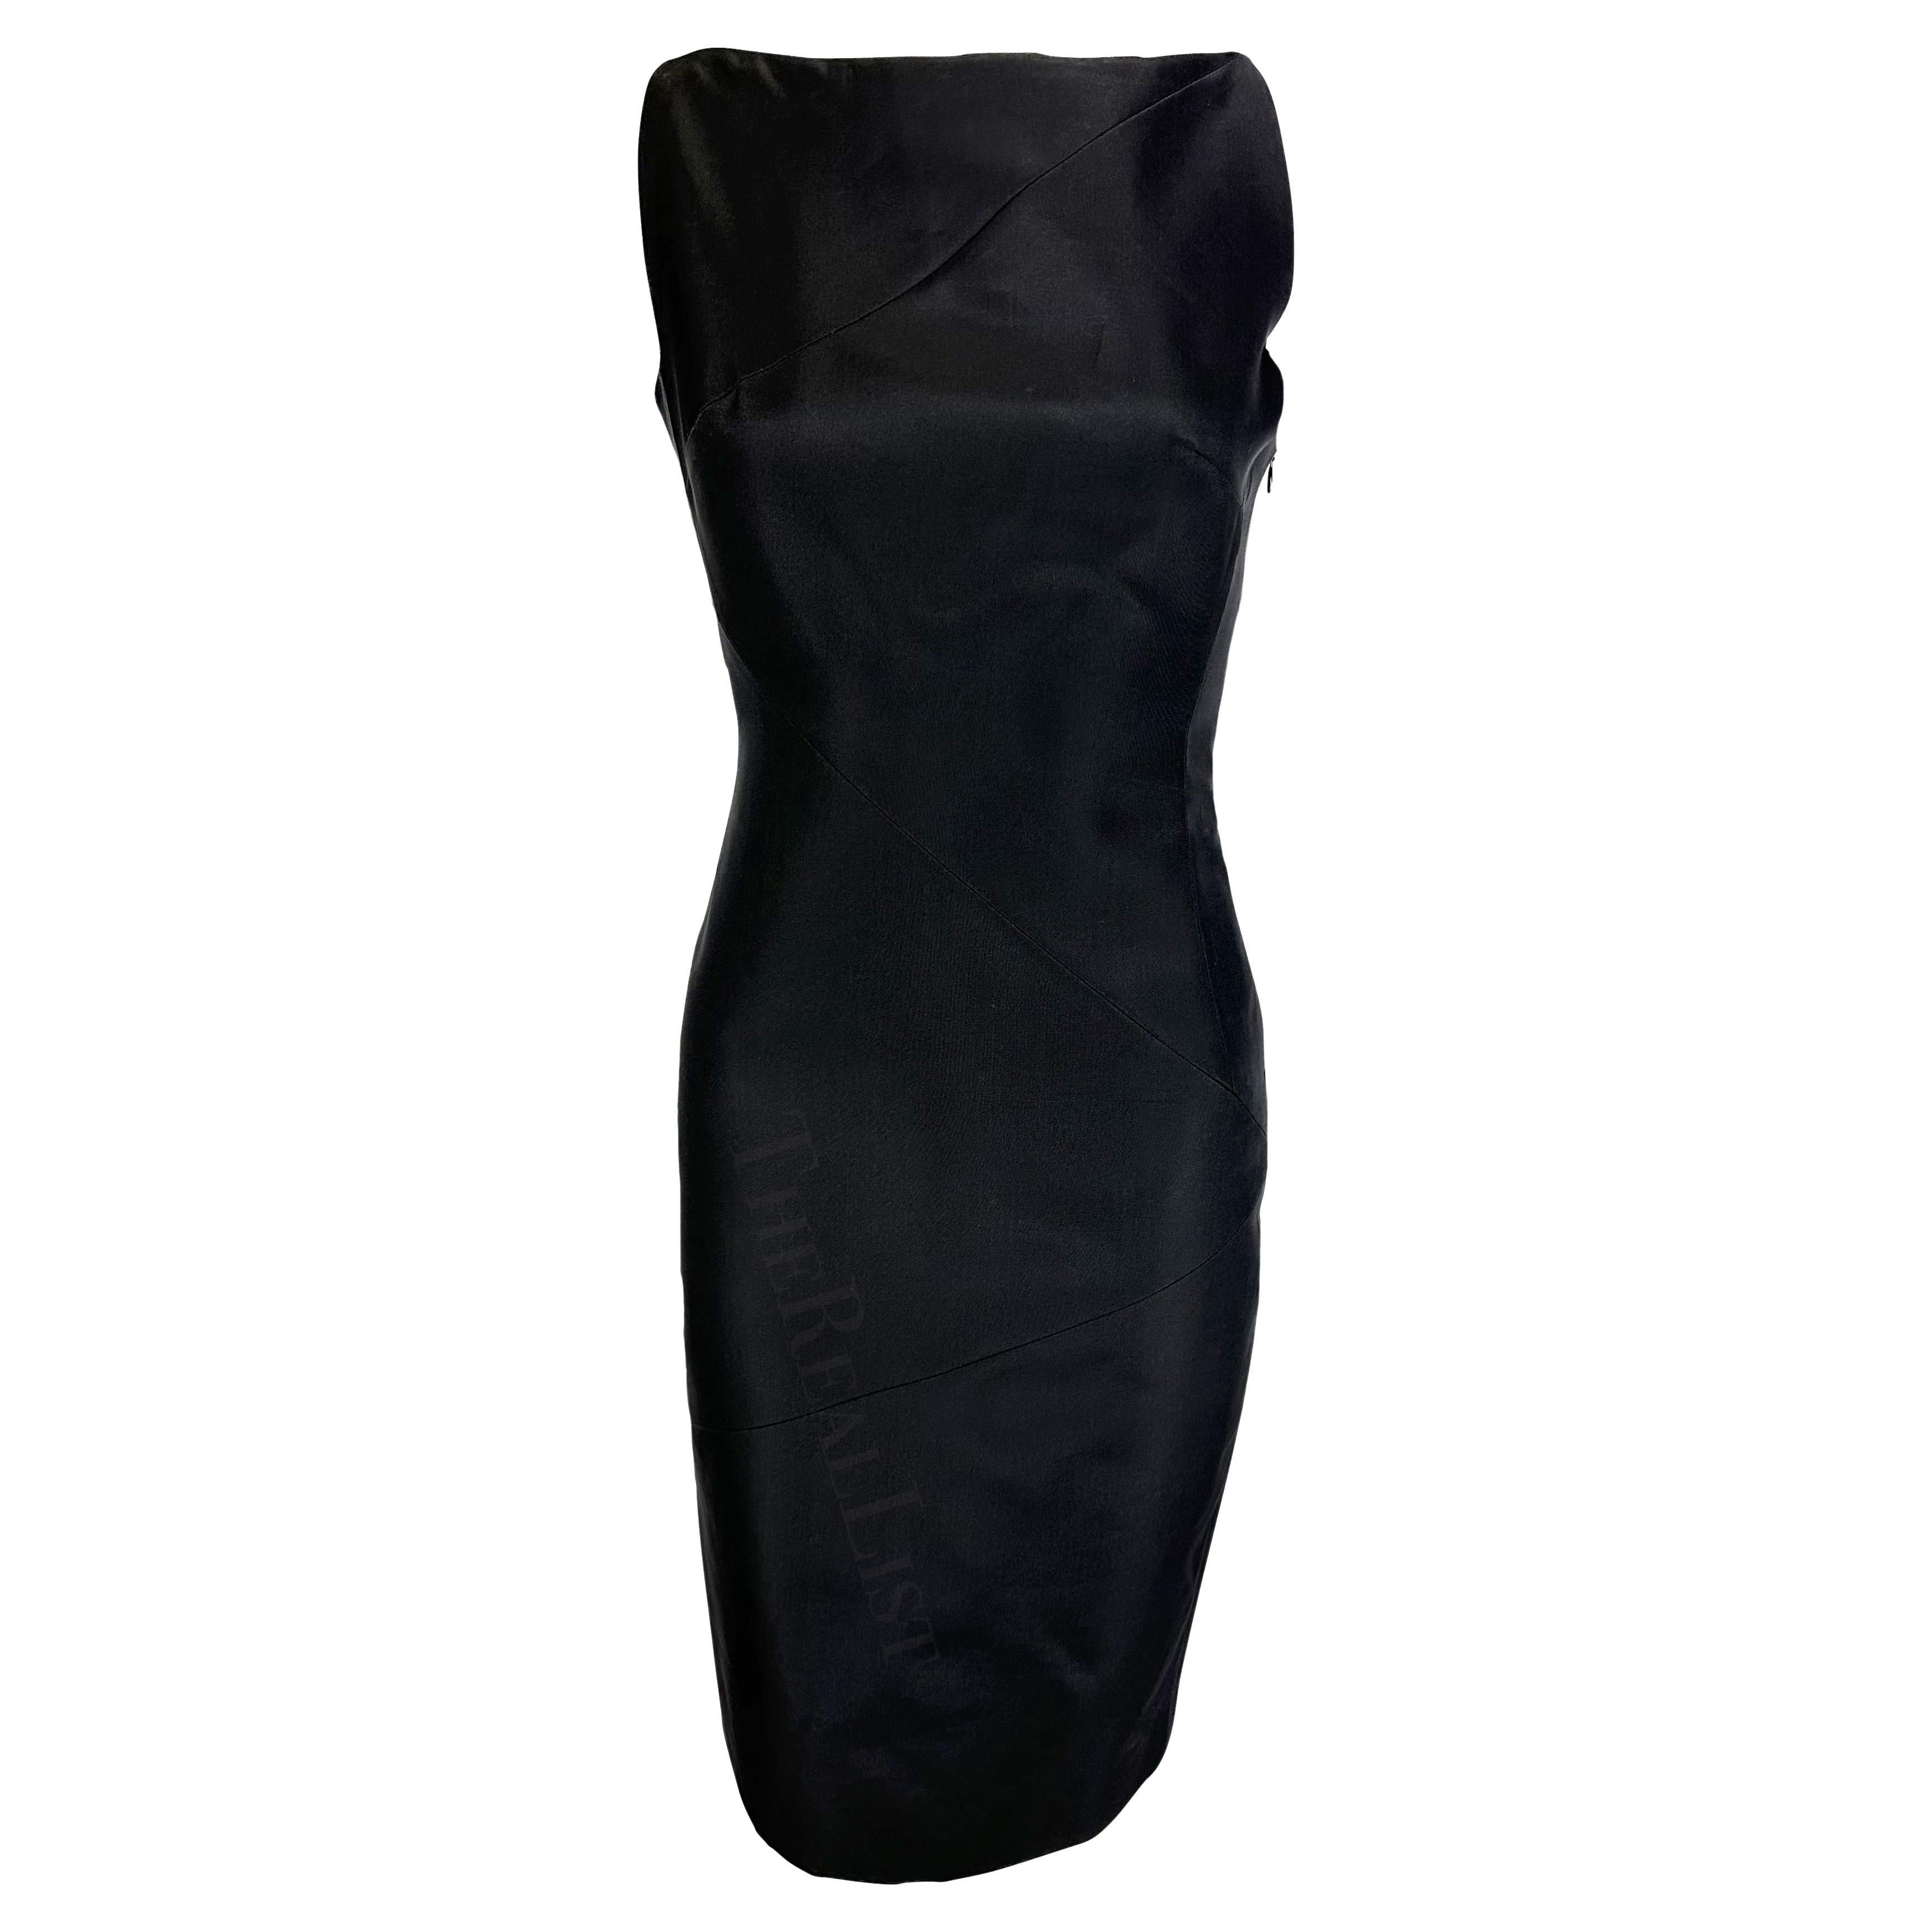 S/S 1998 Gucci by Tom Ford Runway Black Sleeveless Panel Bodycon Bateau Dress For Sale